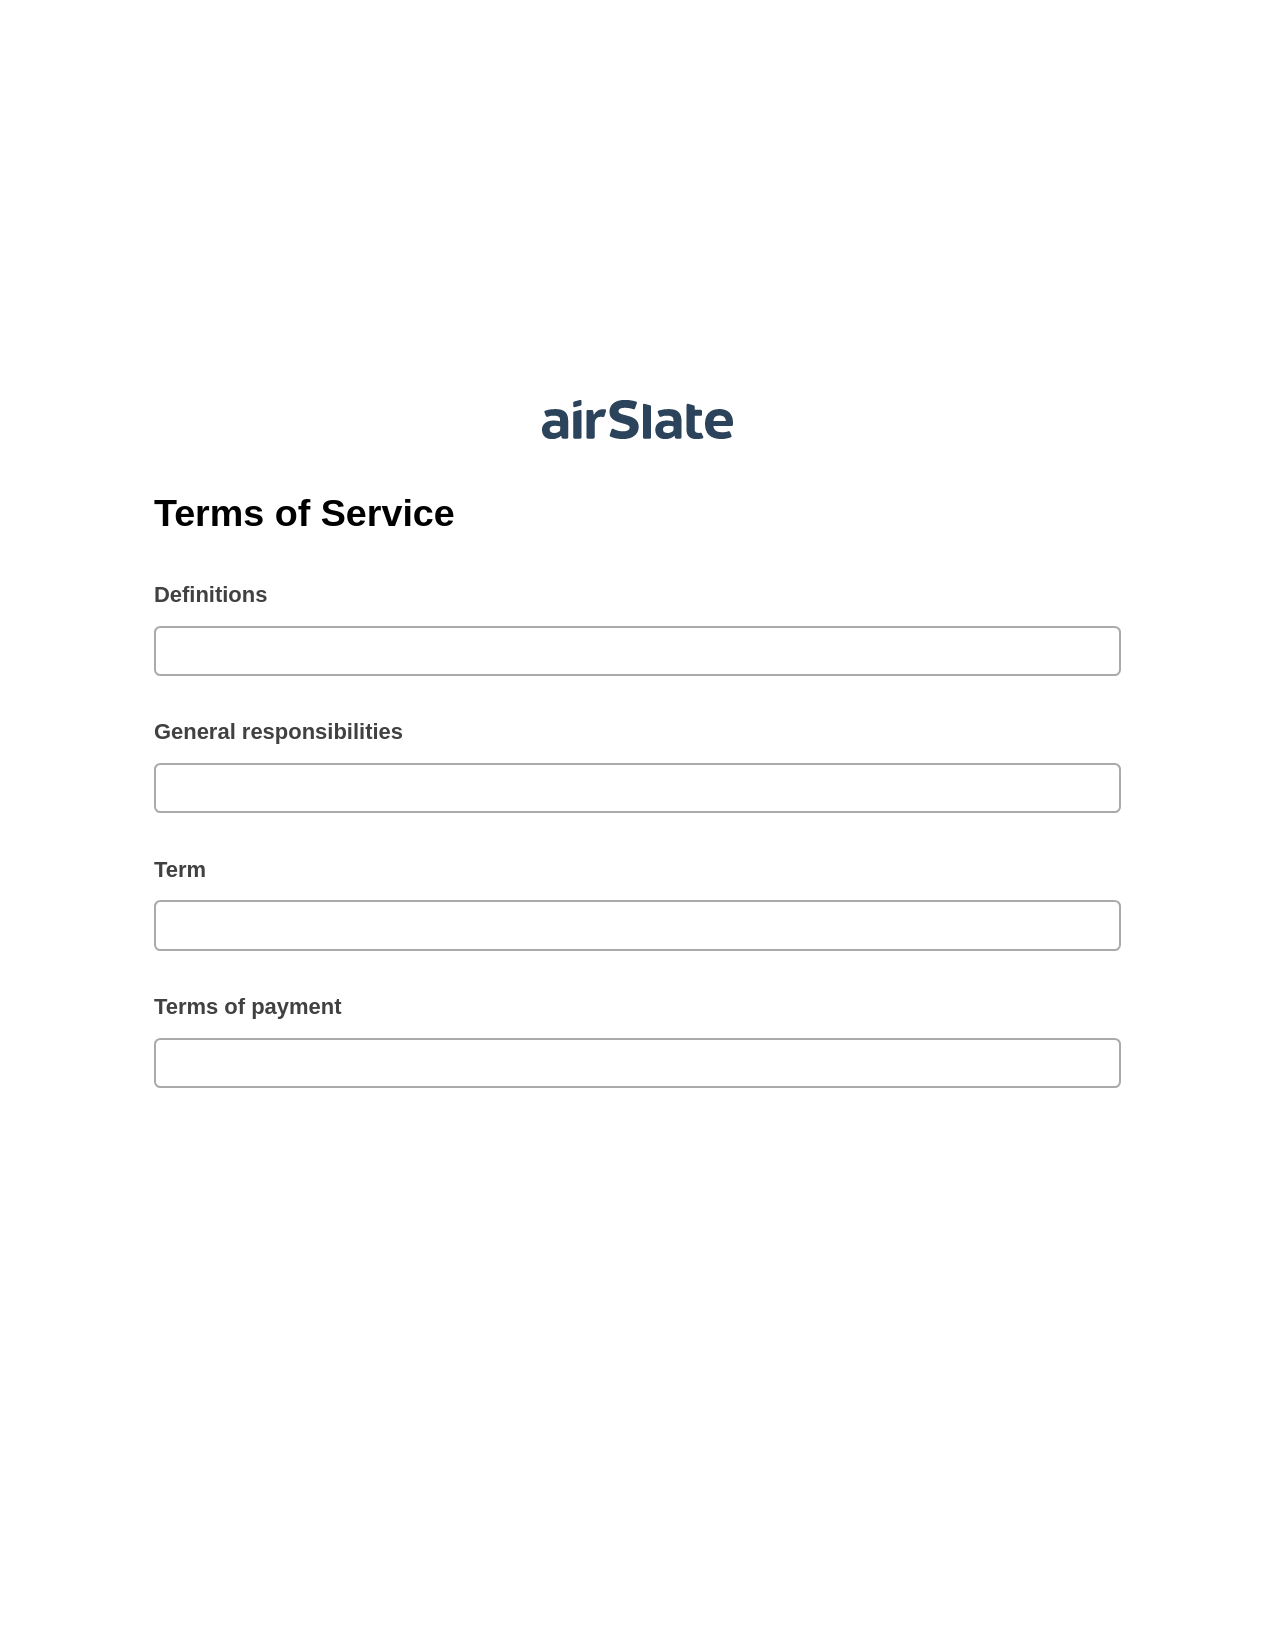 Terms of Service Pre-fill from another Slate Bot, Create Slate Reminder Bot, Post-finish Document Bot